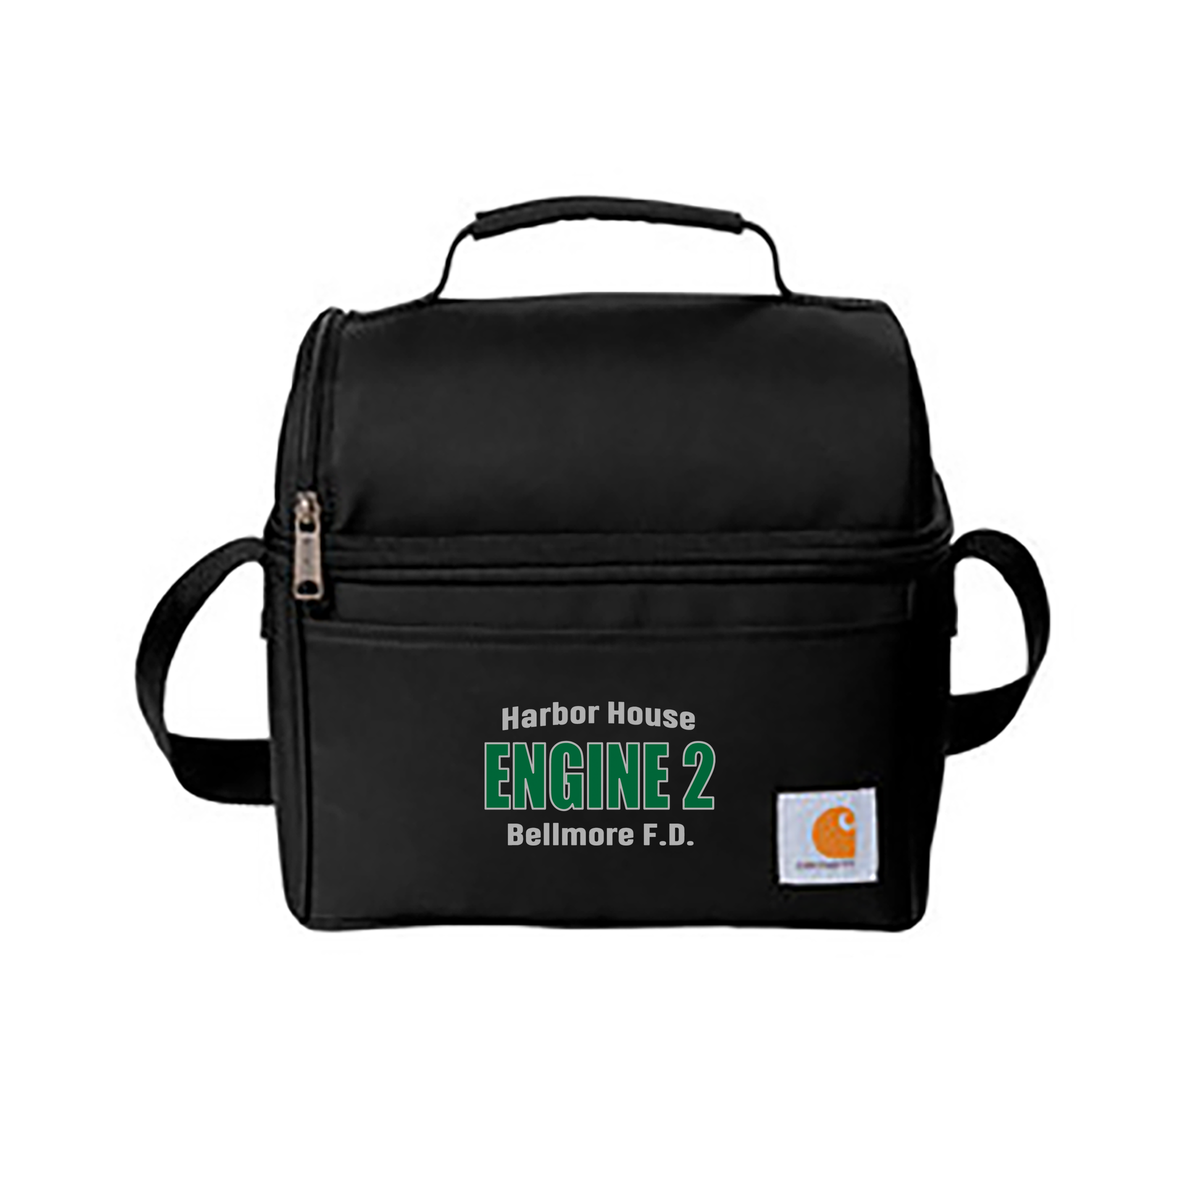 Harbor House Engine 2 Carhartt Lunch 6-Can Cooler